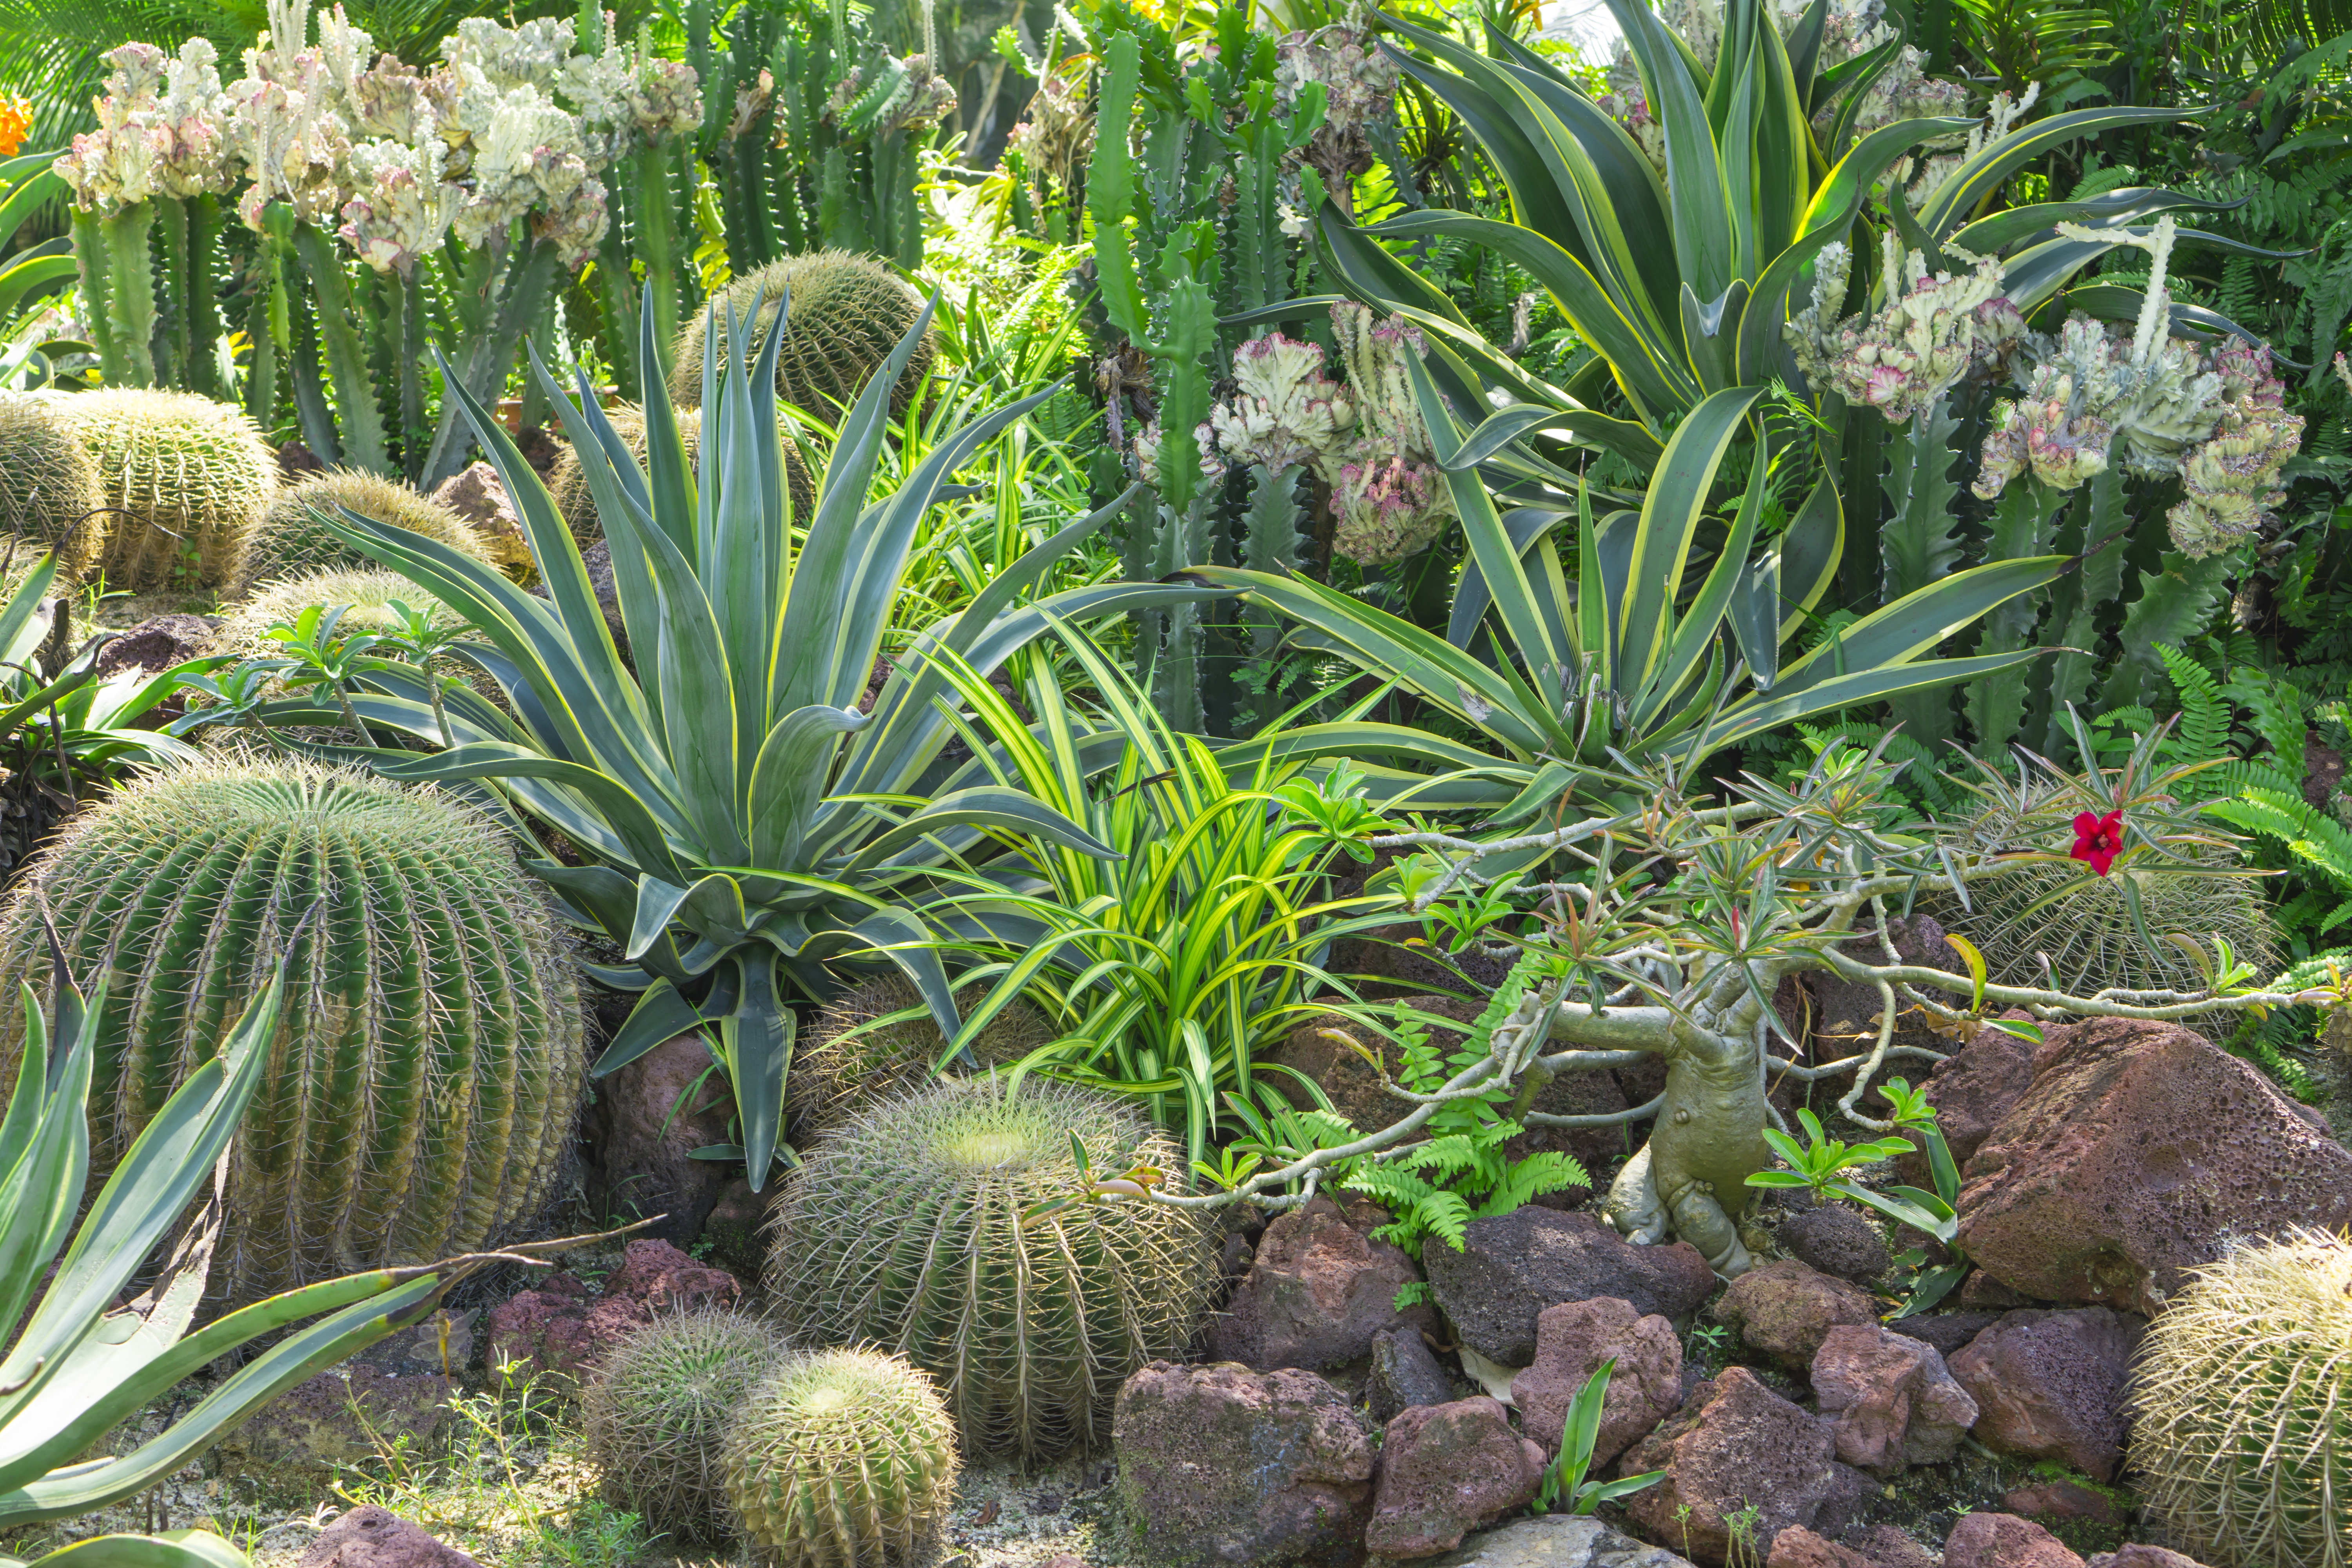 Beautiful Cactus garden, decorated with Cactuses, Agave, Crown of thorns plant, brown sand stone, green leafs shrub on background